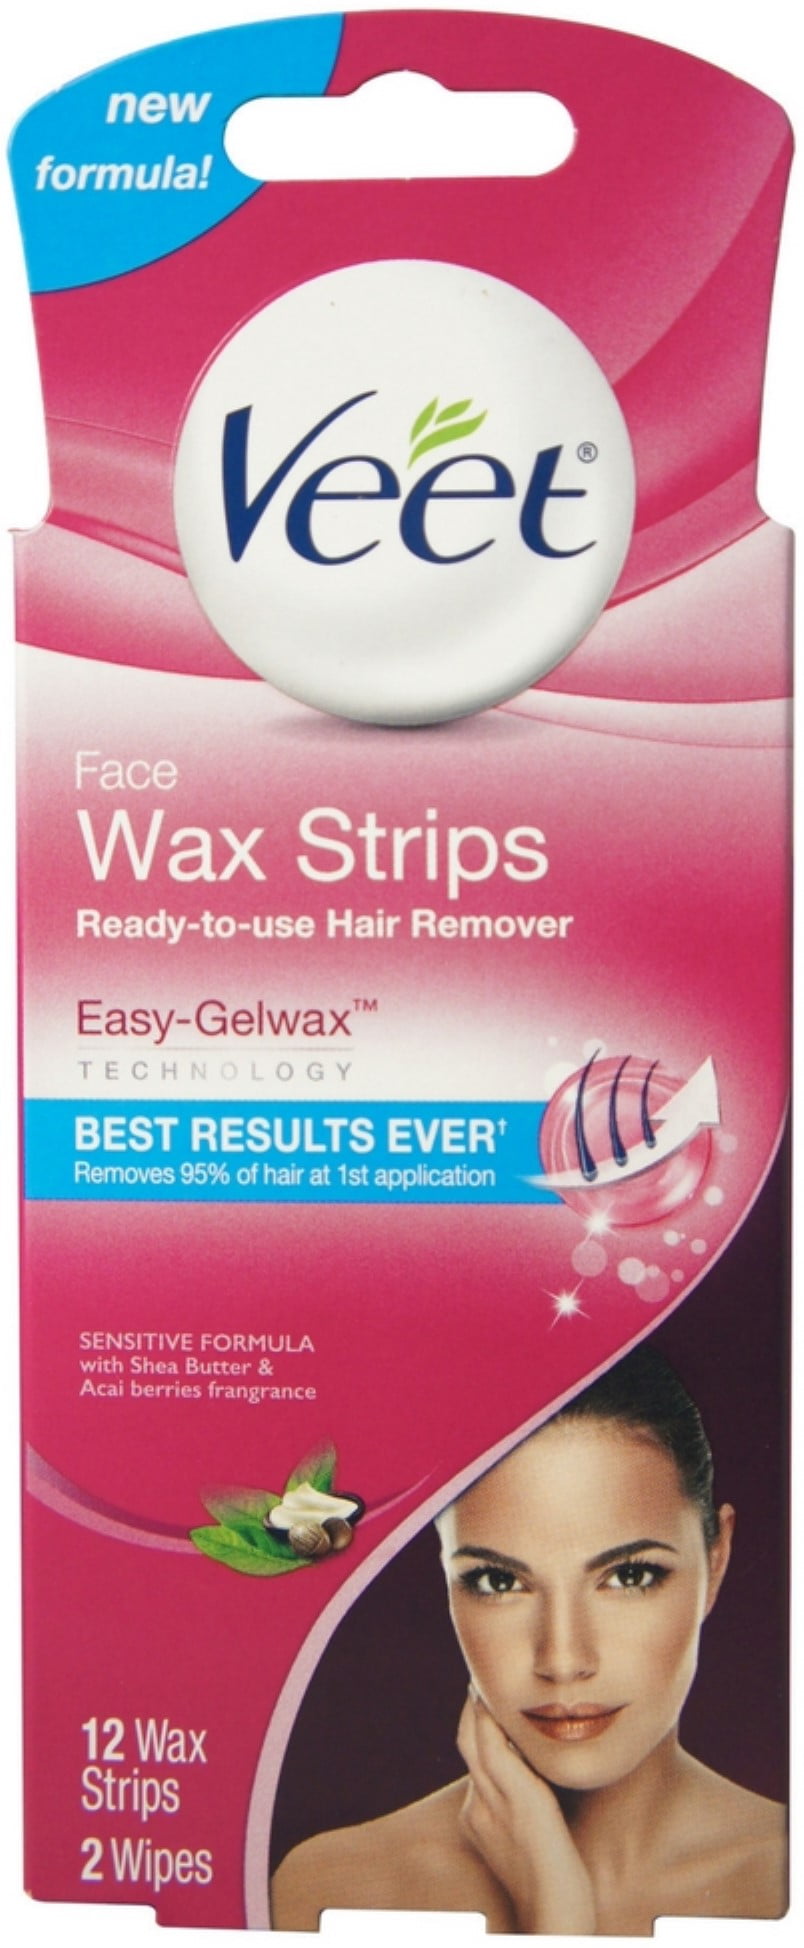 VEET Ready-To-Use-Wax-Strips Hair Remover Face 12 ea 